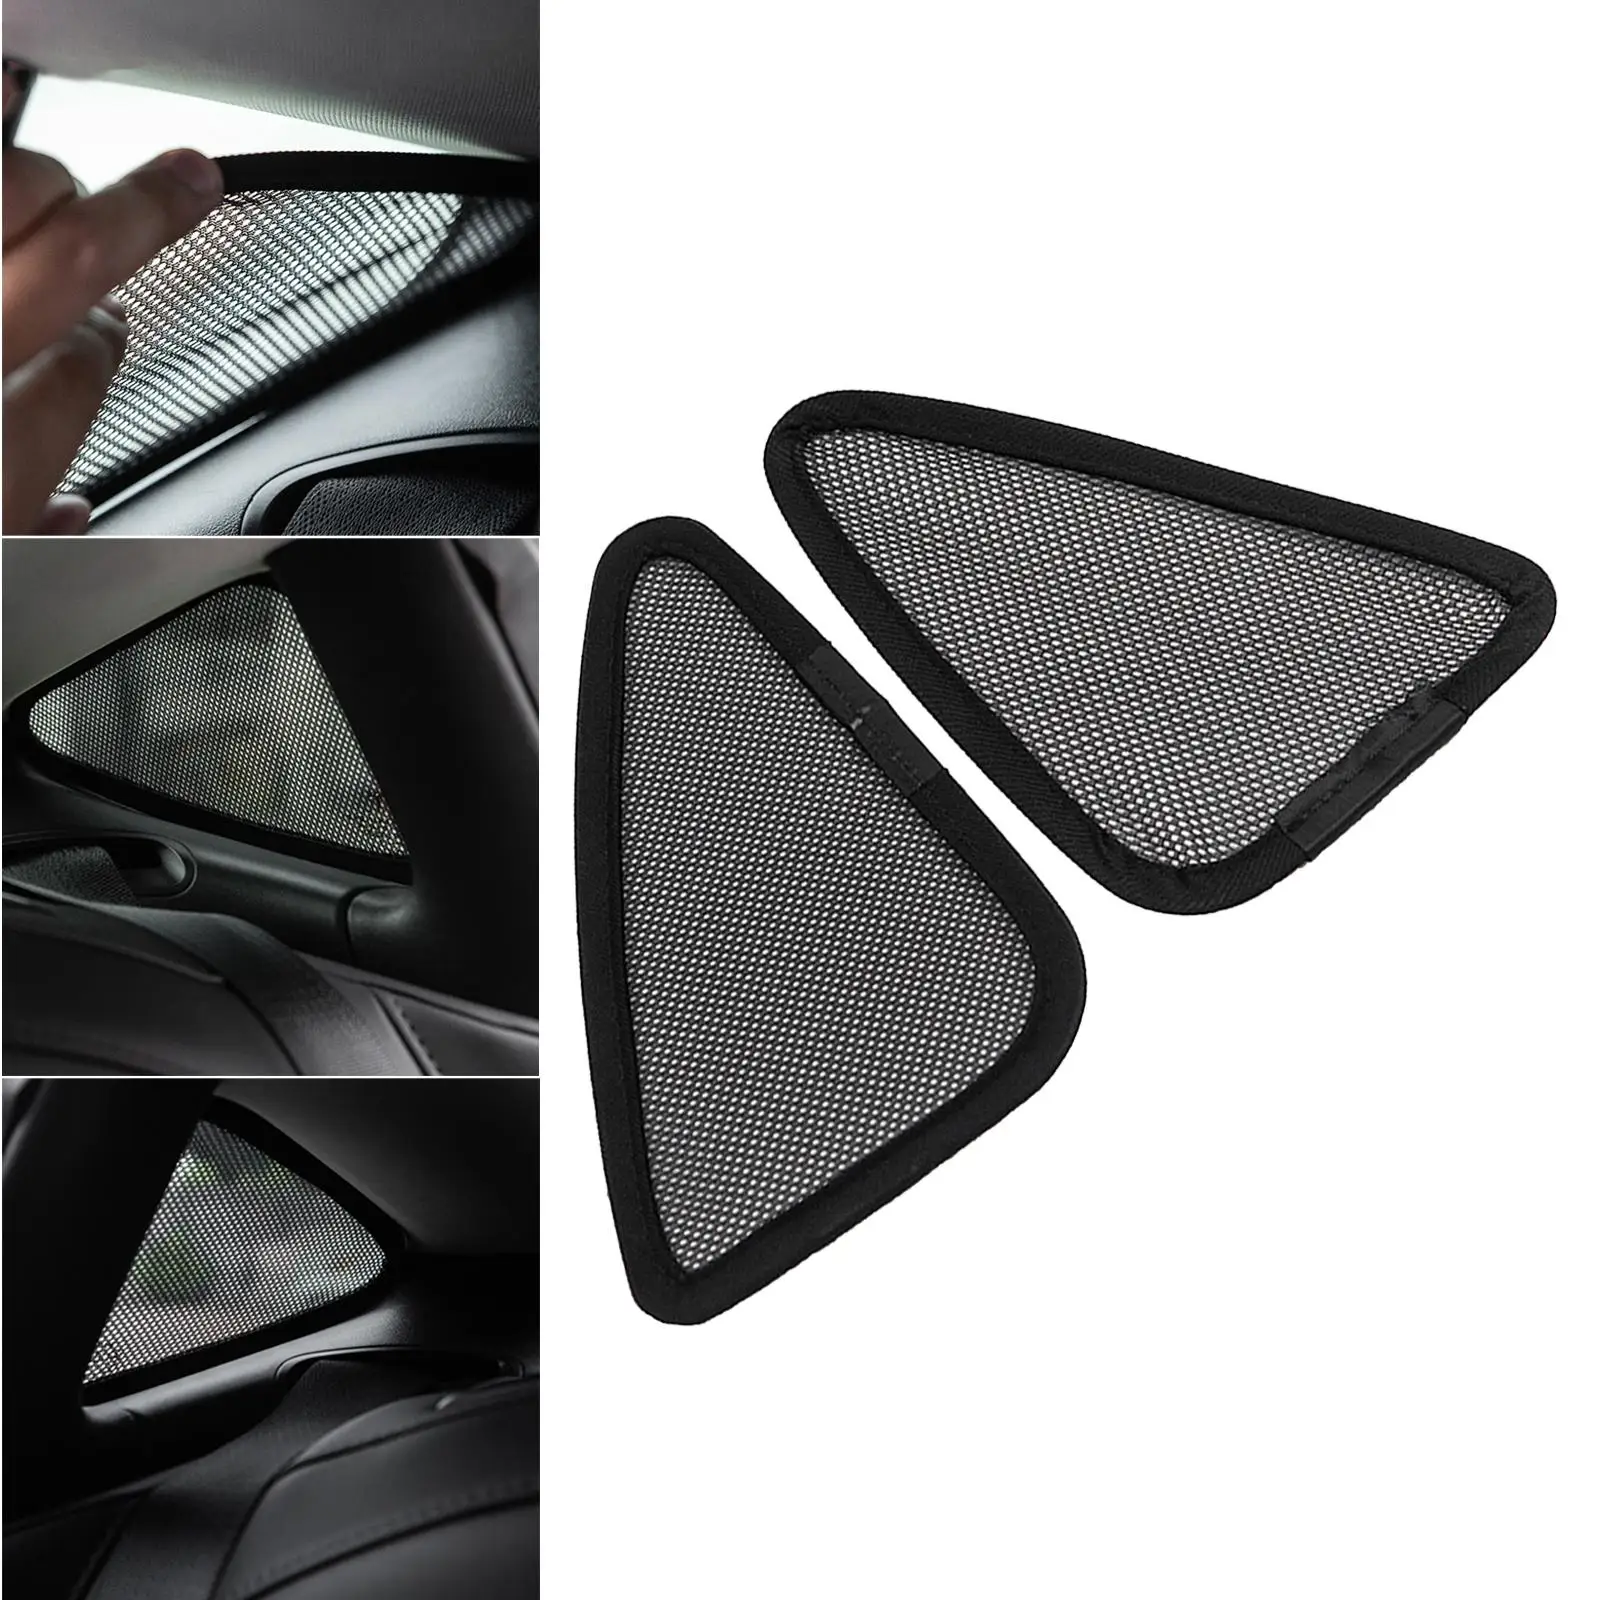 Set of 2 Vehicle Sunshade Line Shades Cover Triangular Net for